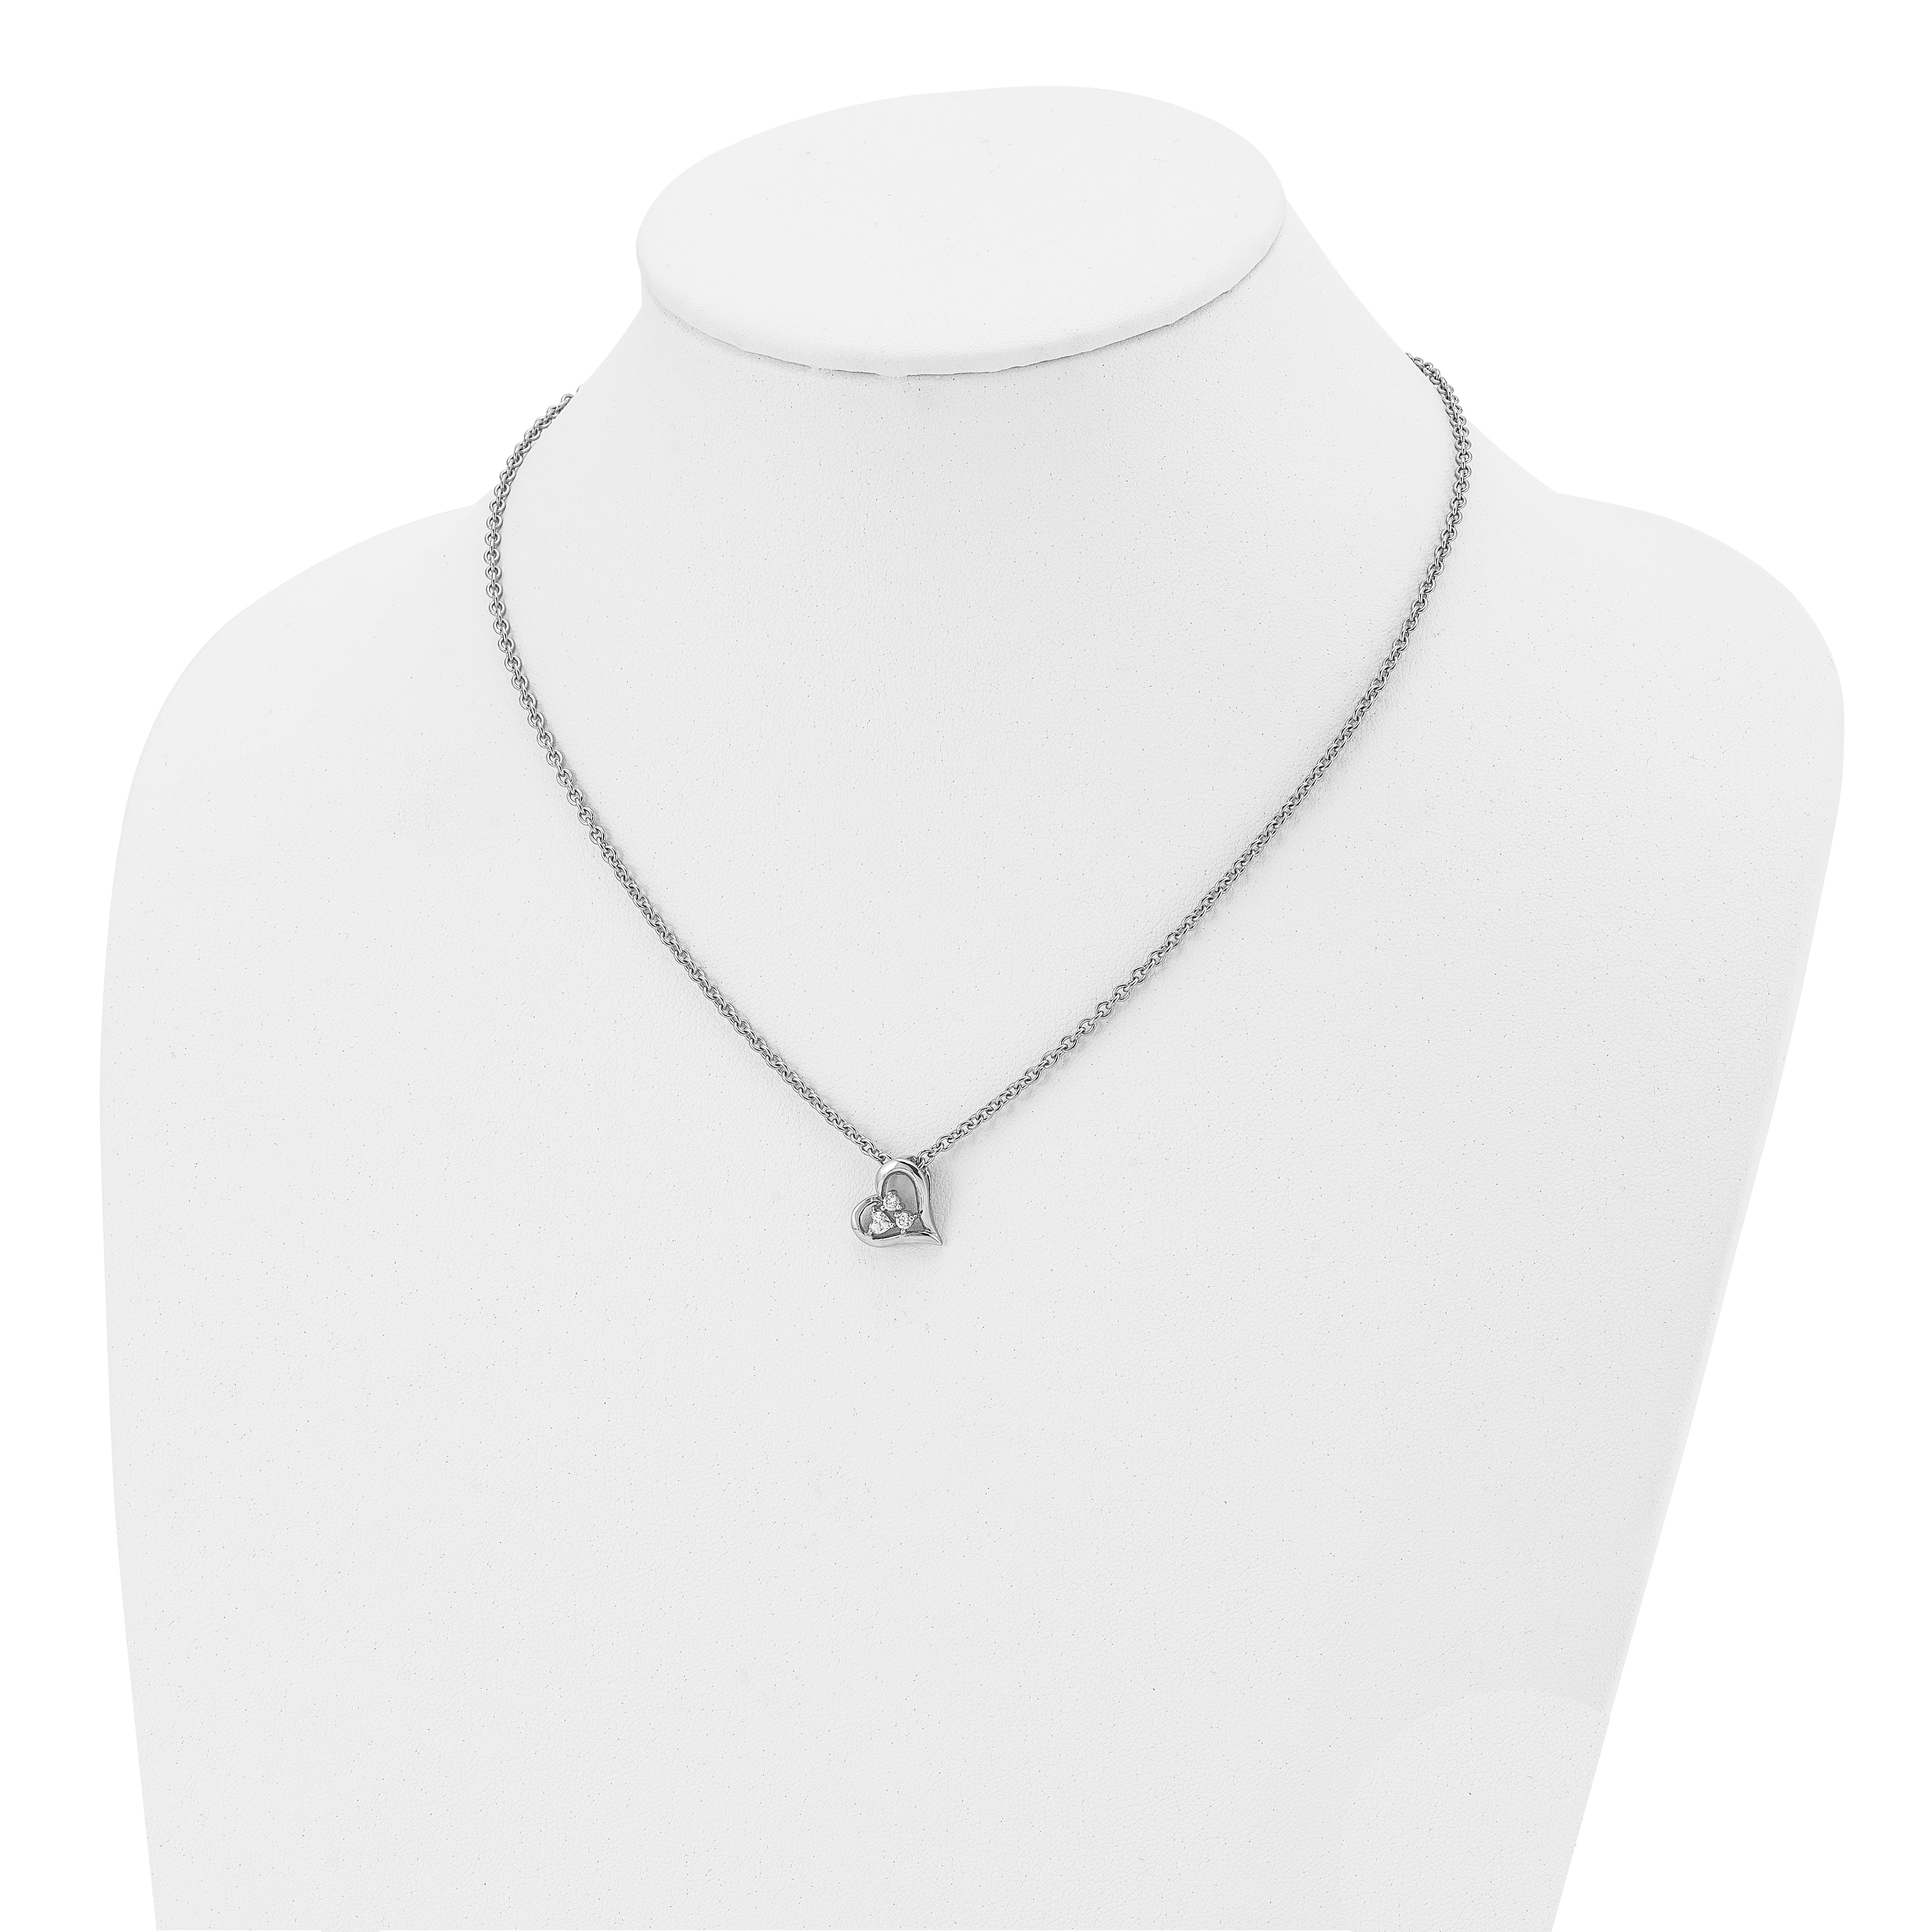 Stainless Steel Polished w/CZ Heart 18in Necklace